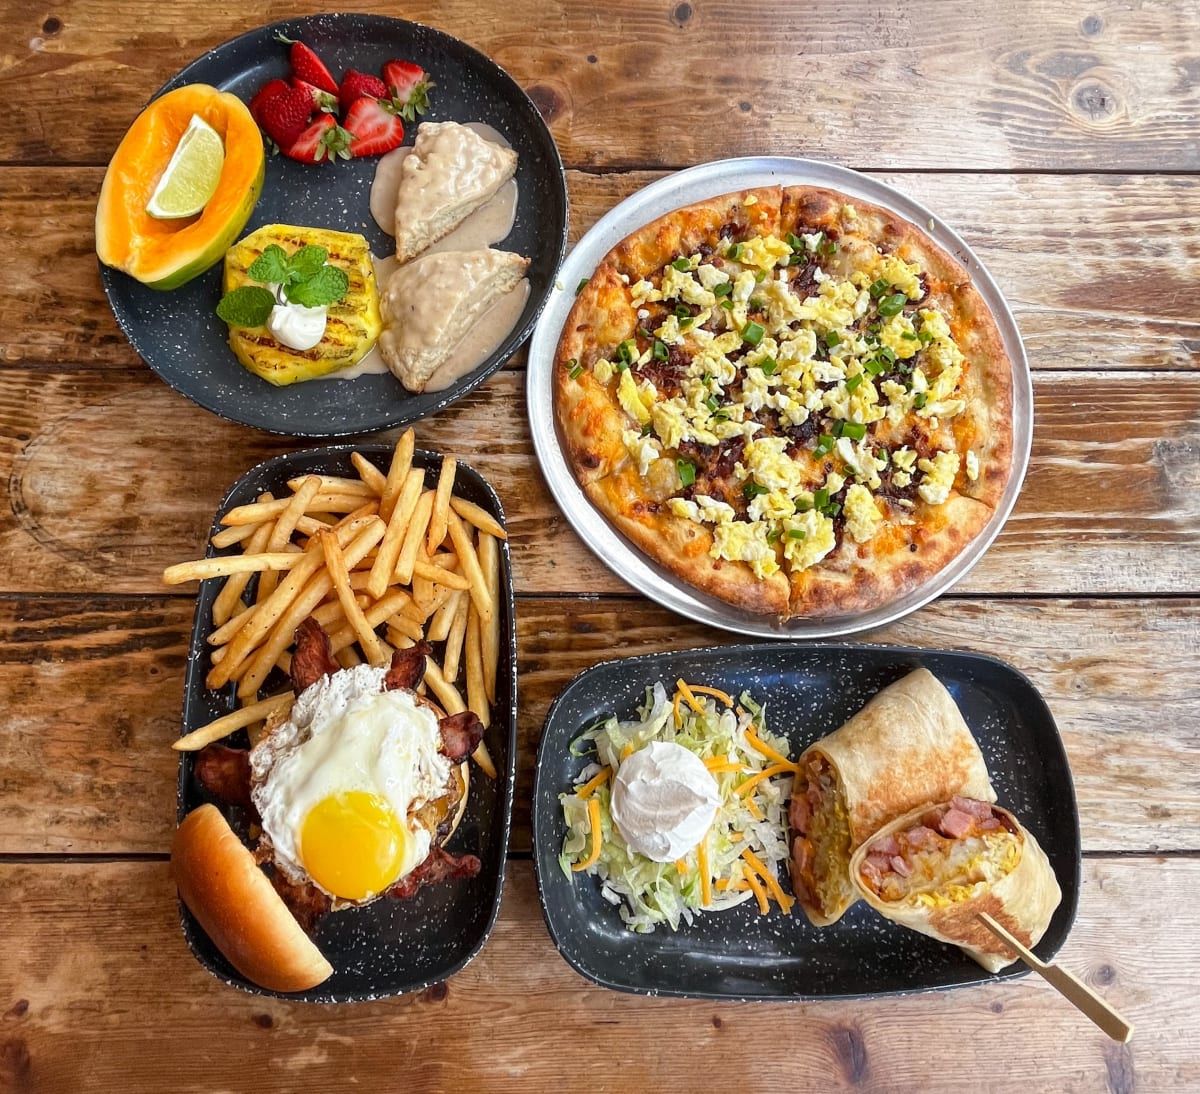 A Table Full Of Food